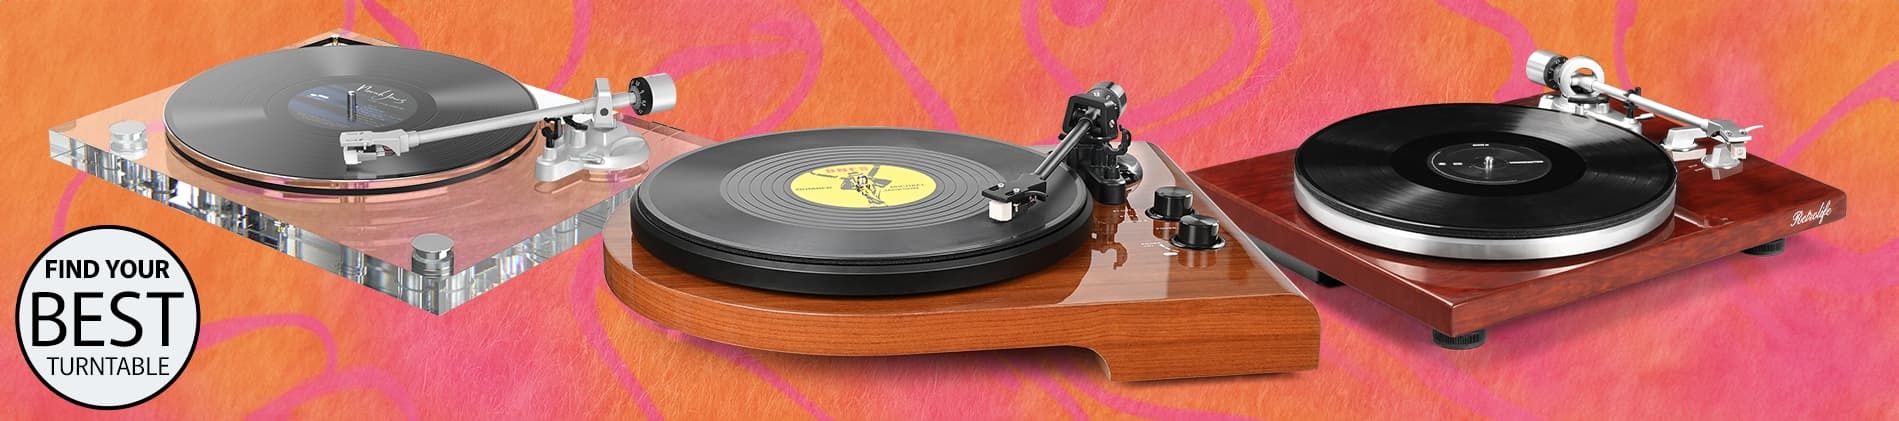 Find Your Best Turntable